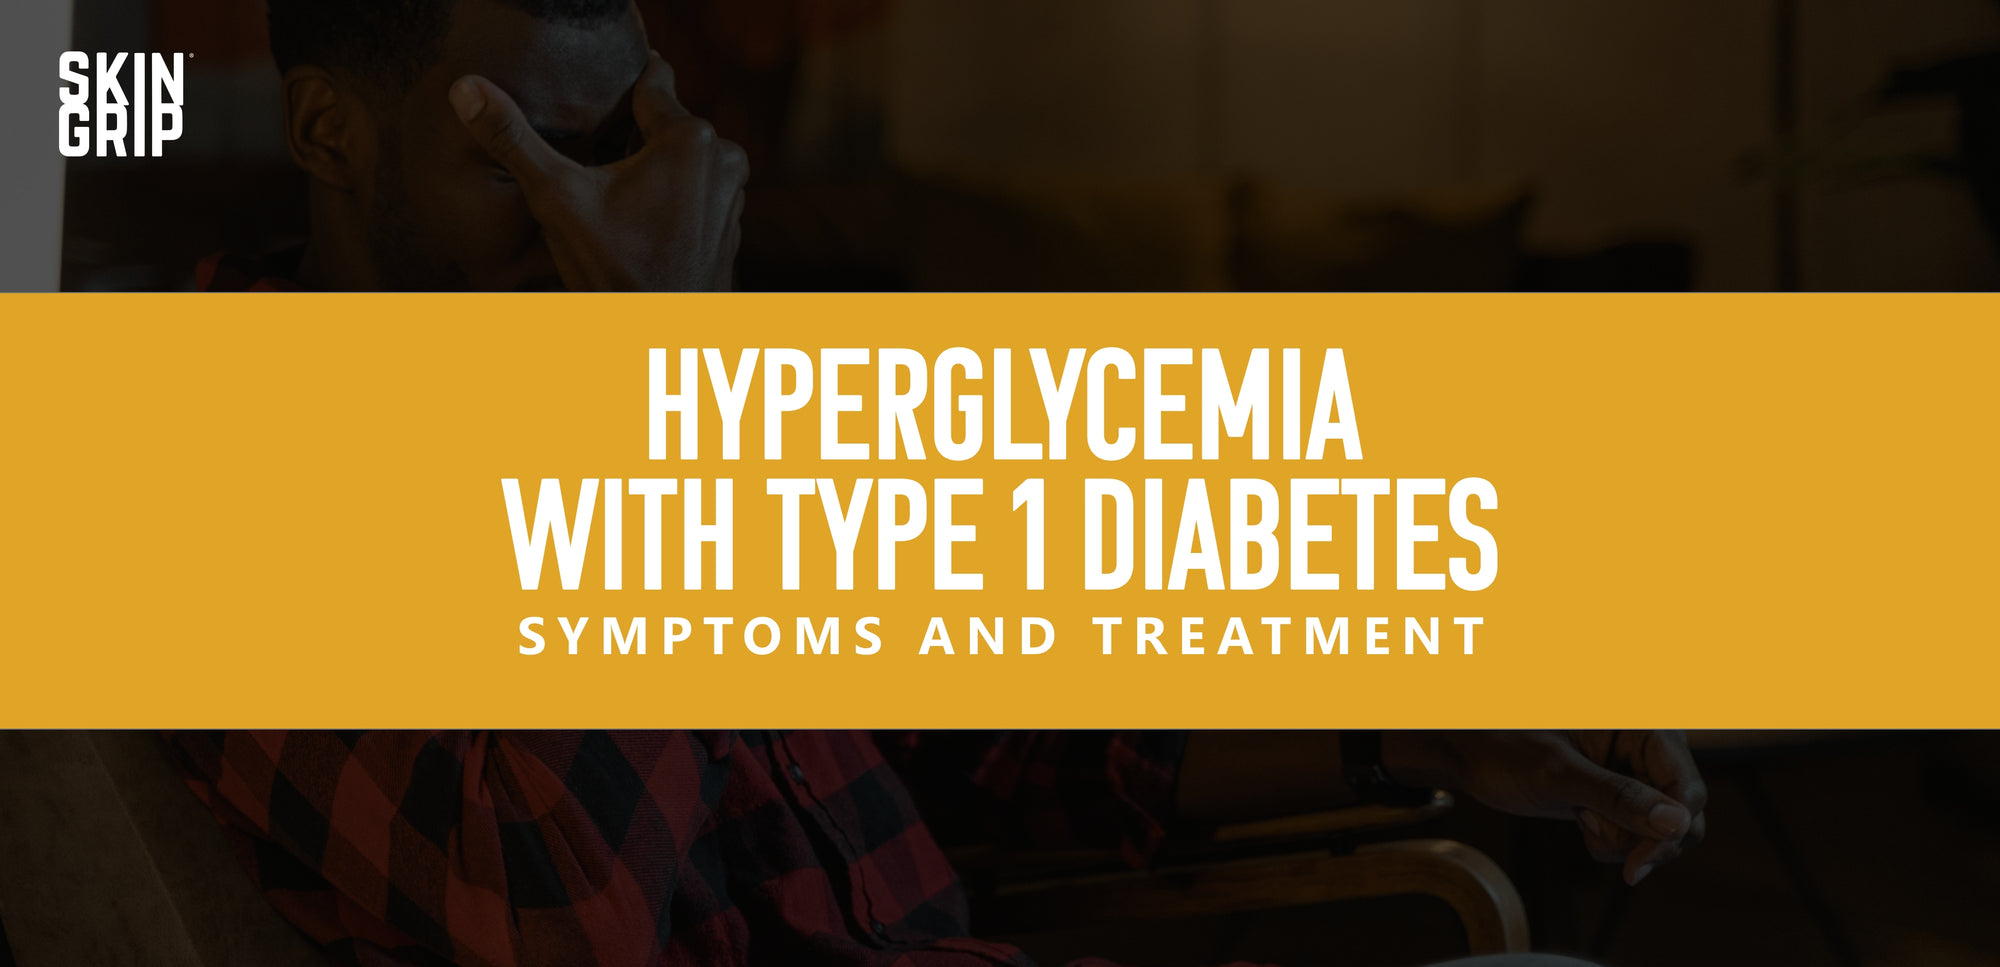 Hyperglycemia with Type 1 Diabetes: Symptoms and Treatment